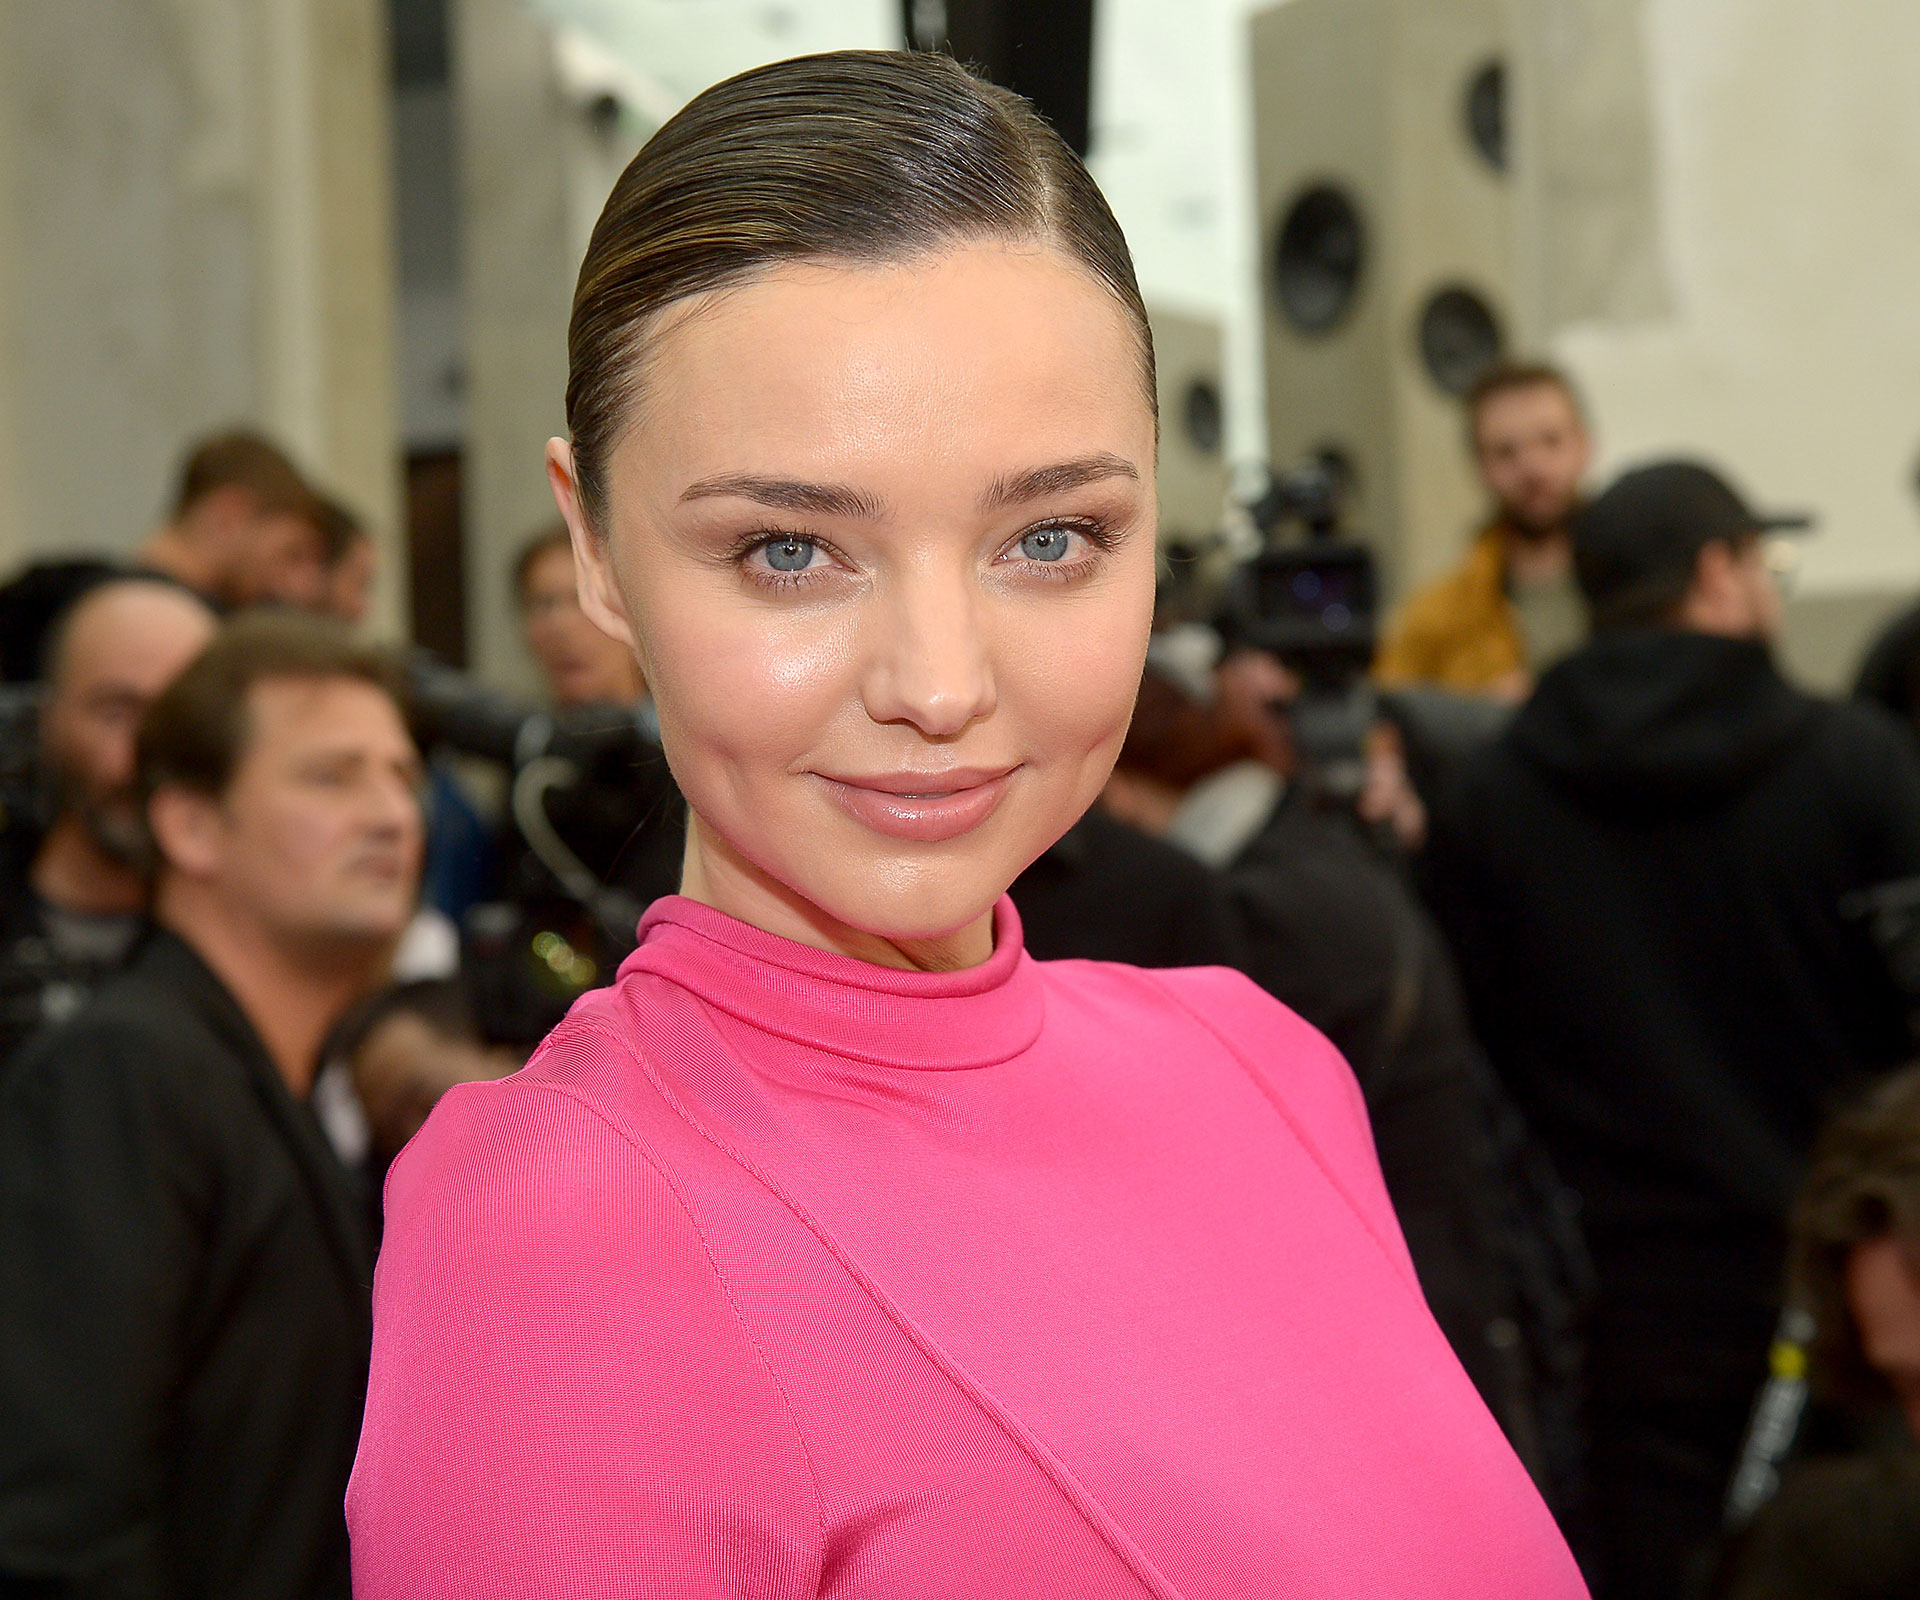 Australian man charged with attempted murder over Miranda Kerr security guard stabbing